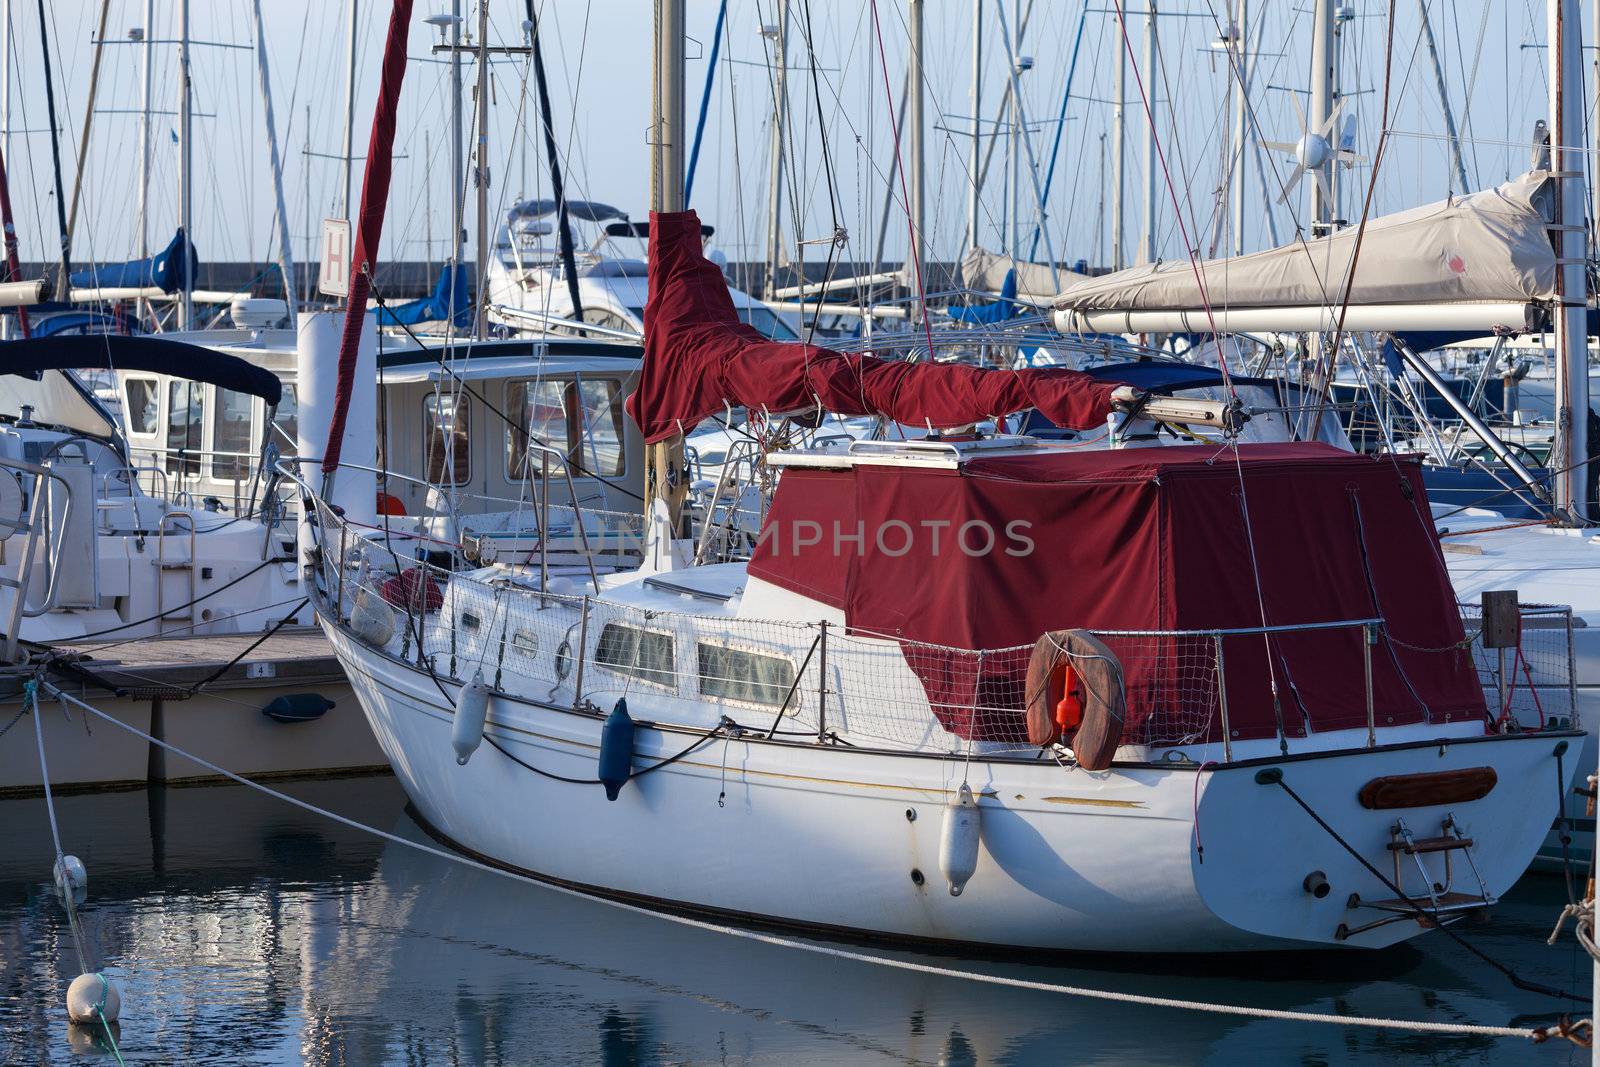 Small luxury pleasure yachts moored in a marina under a sunny blue sky